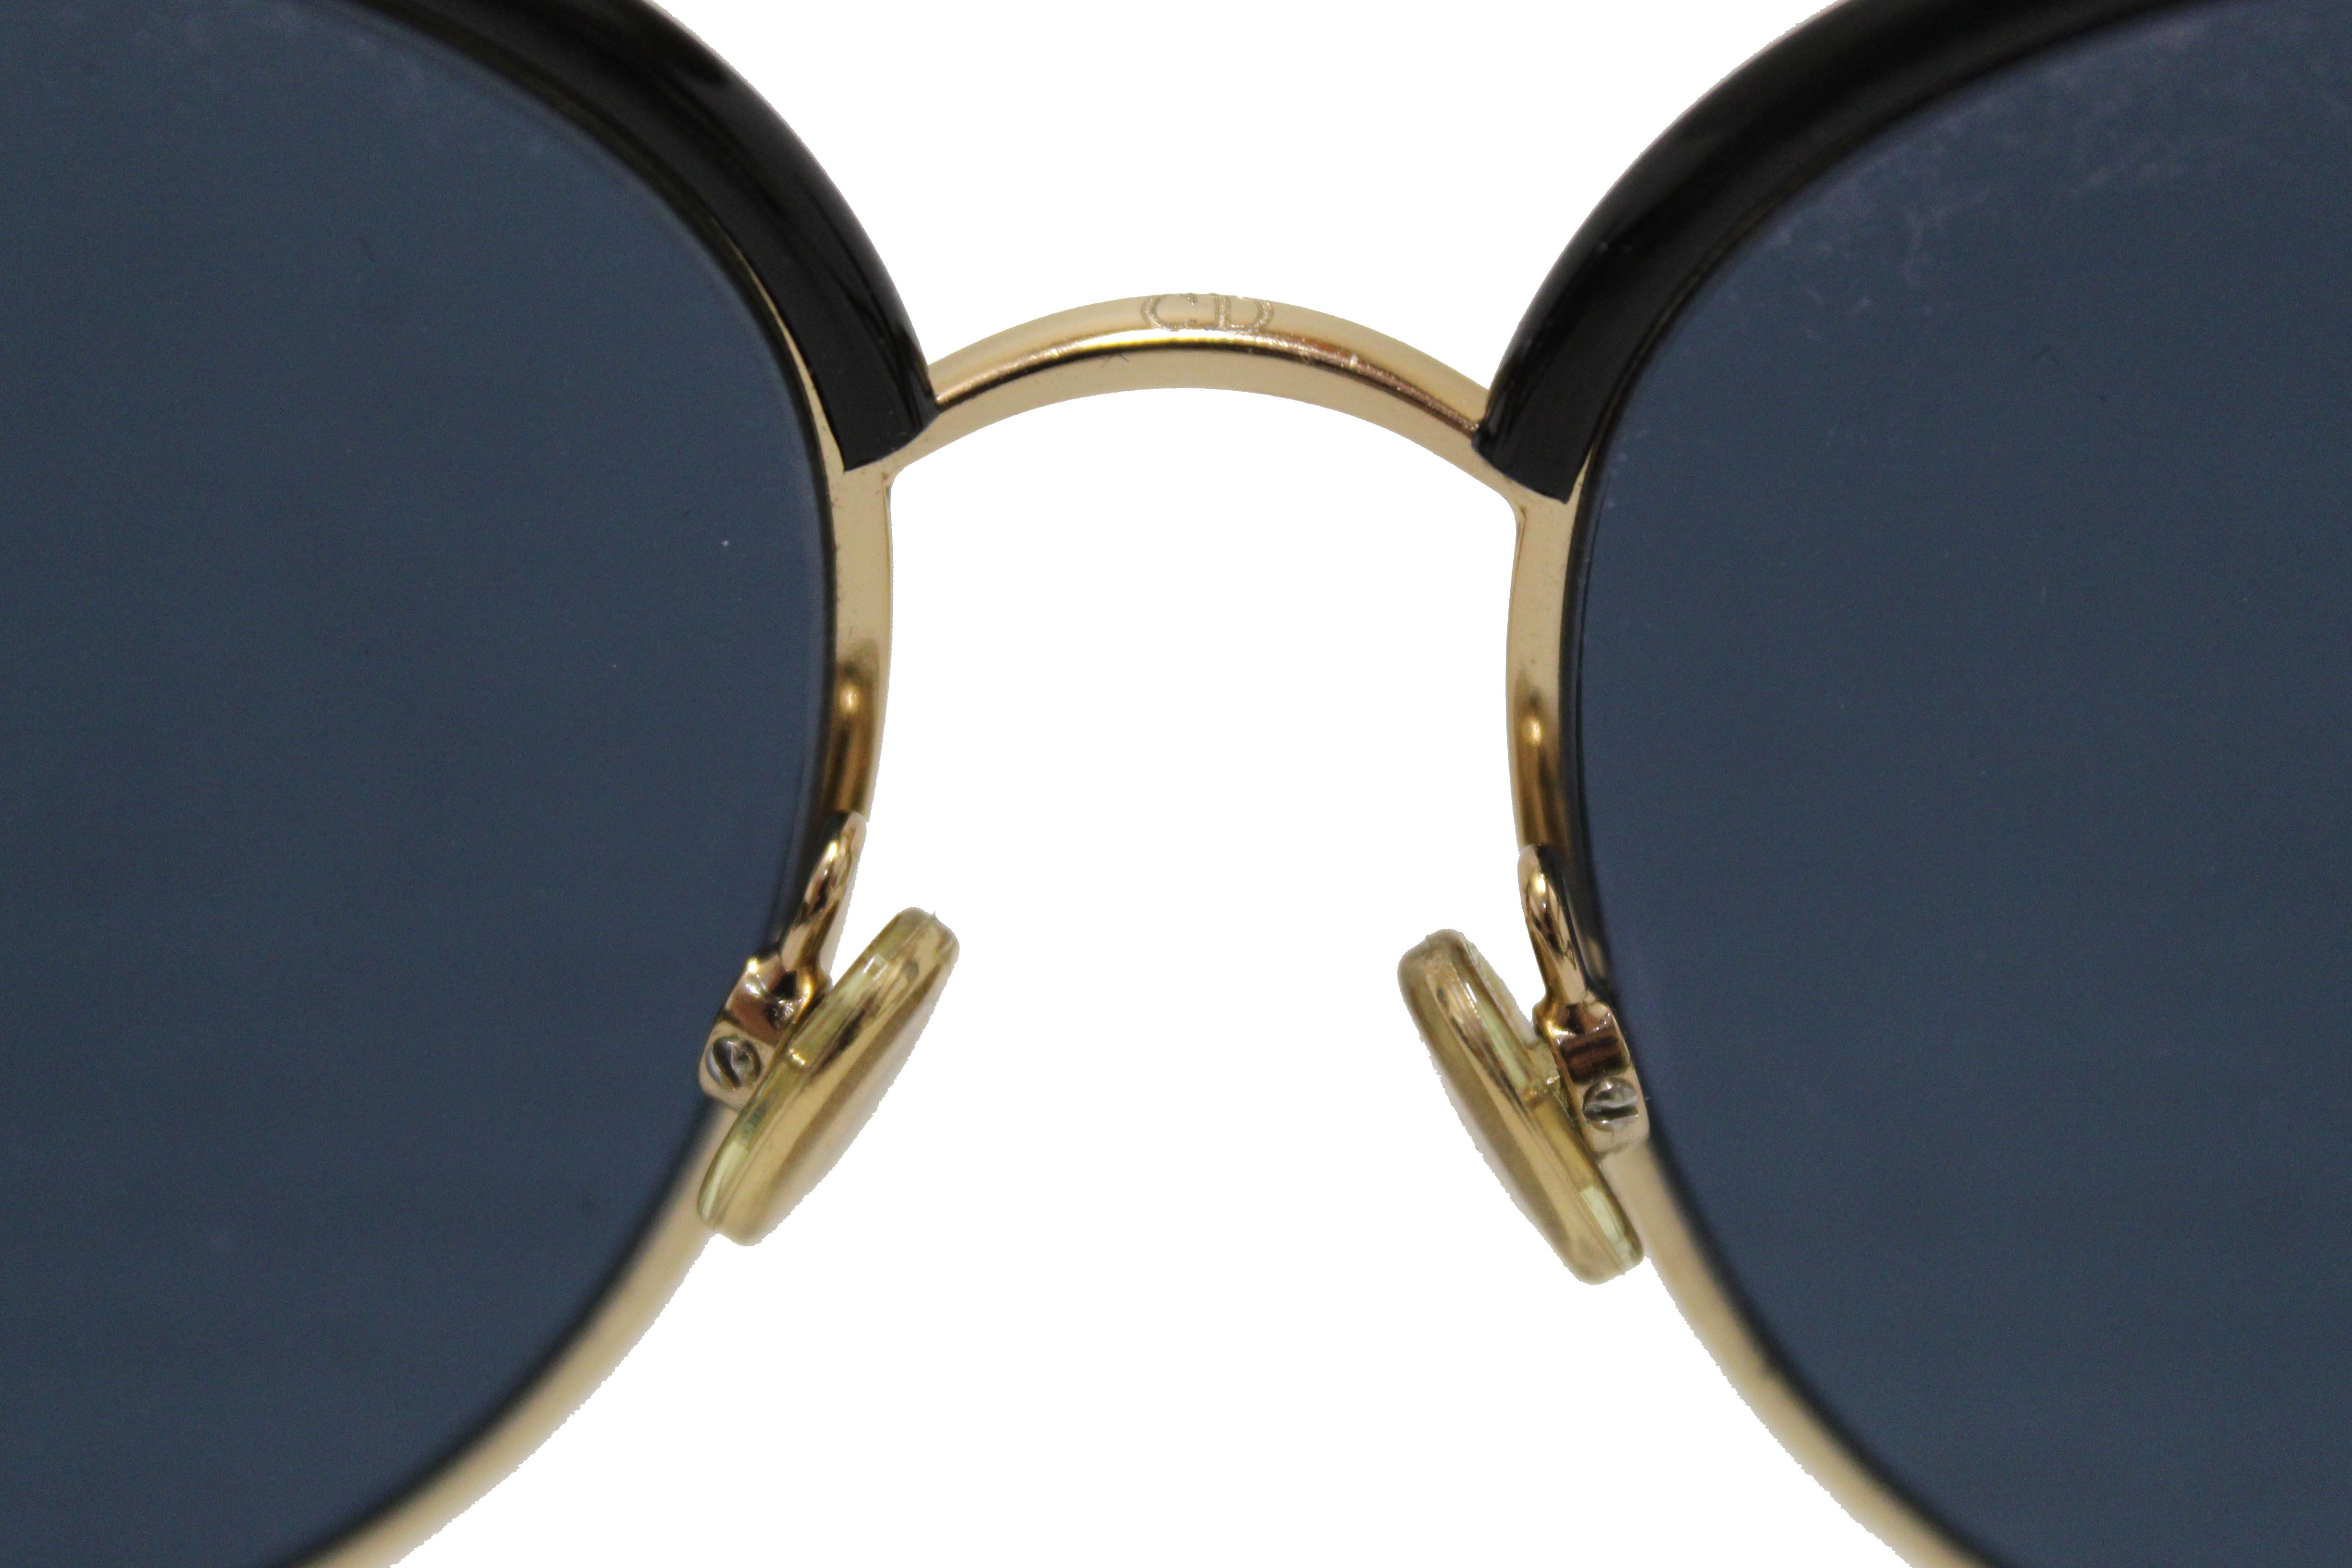 Authentic Dior Black Acetate and Gold Round Framed Sunglasses